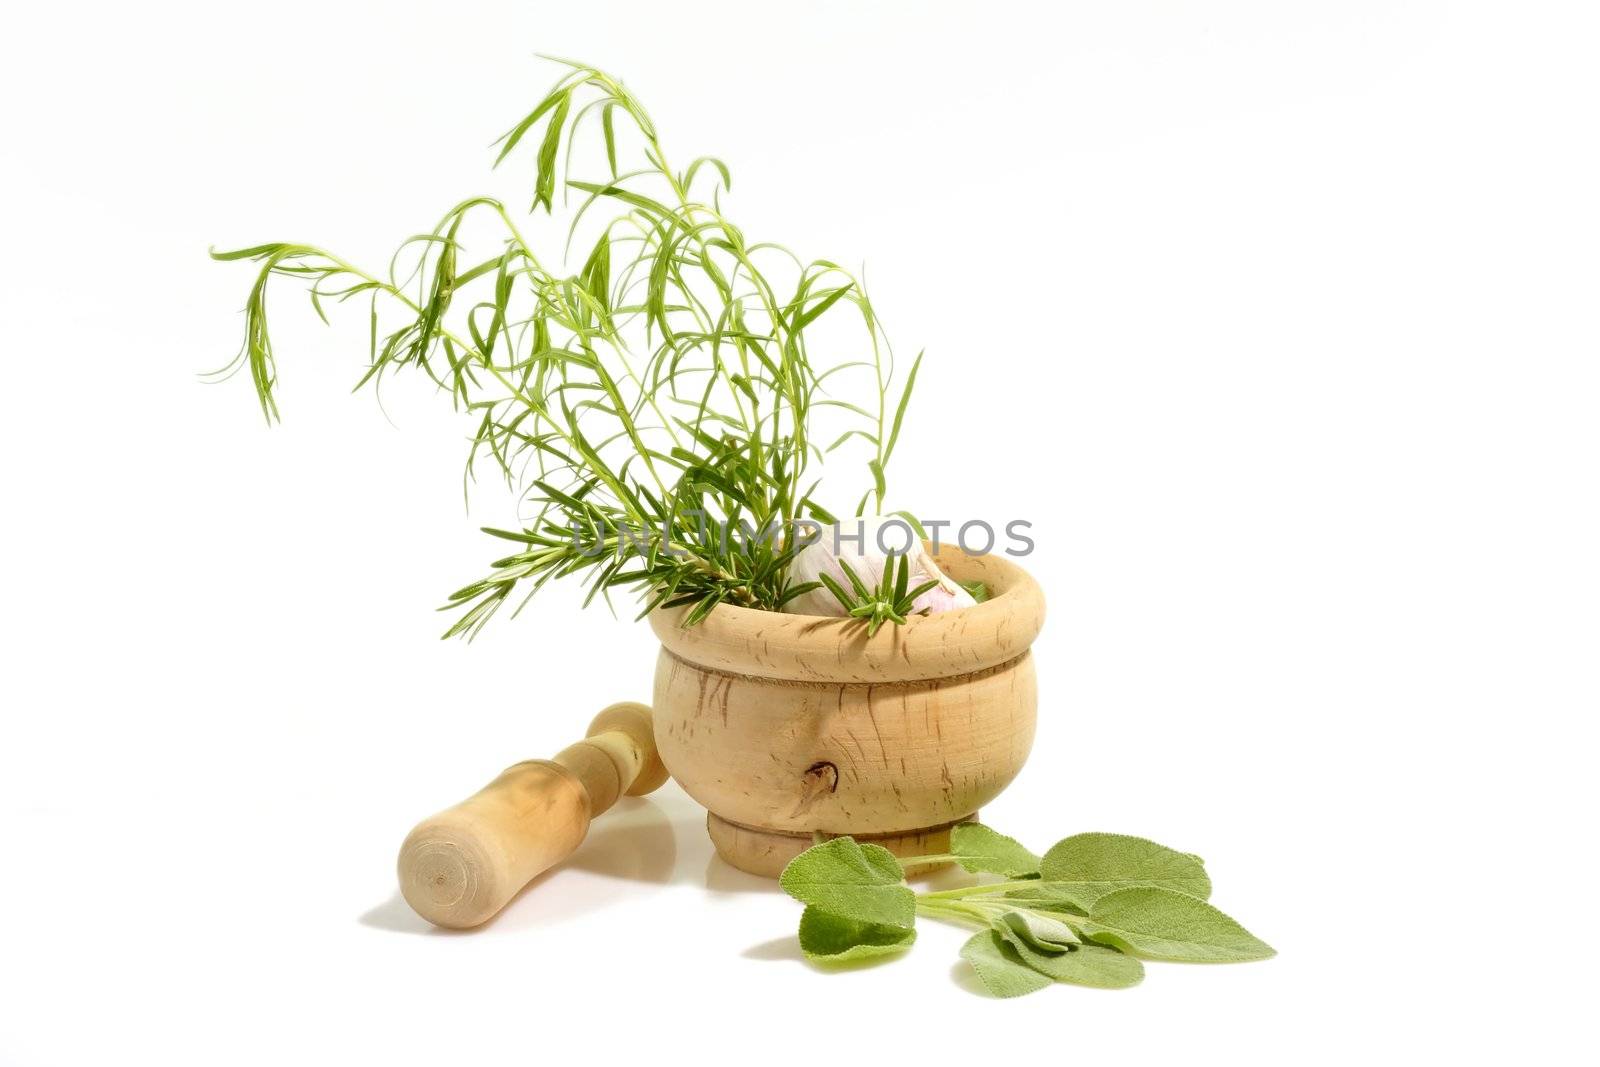 Mortar with Herbs by Teamarbeit